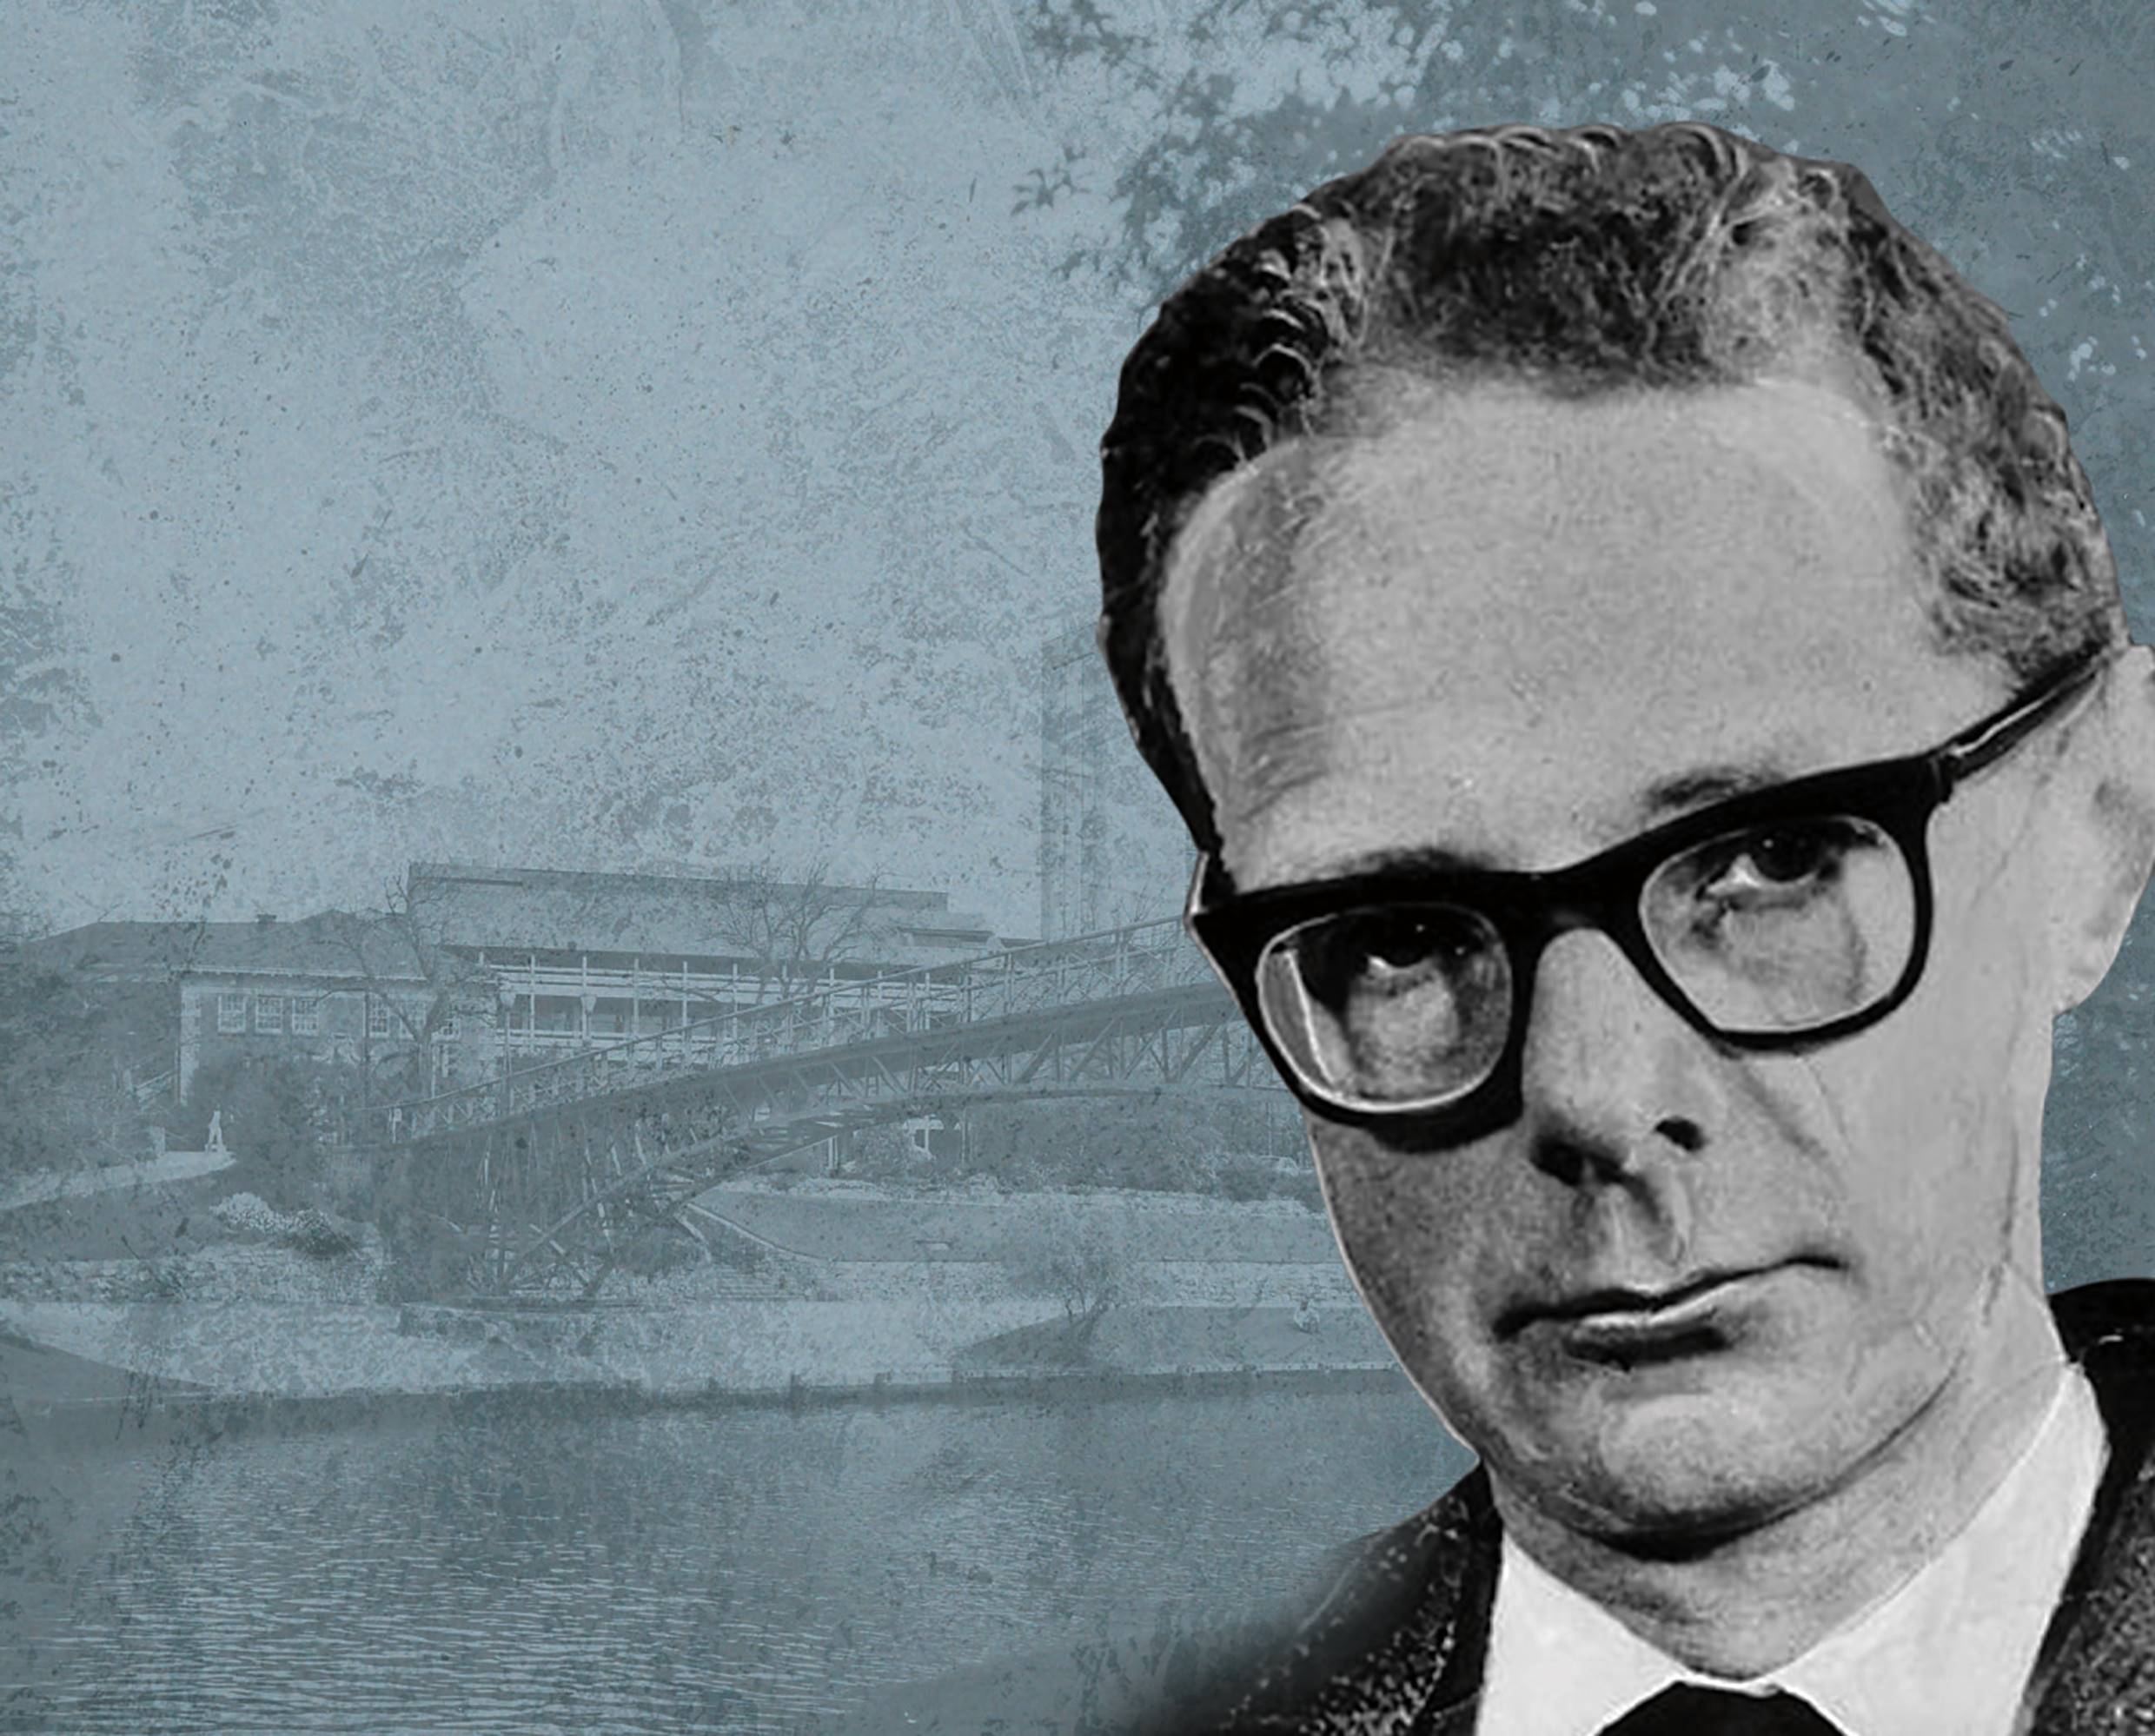 A black and white photo of Dr George Duncan, a man wearing glasses with close-cropped curly hair, is set over a photo of the University Footbridge and the Torrens River.